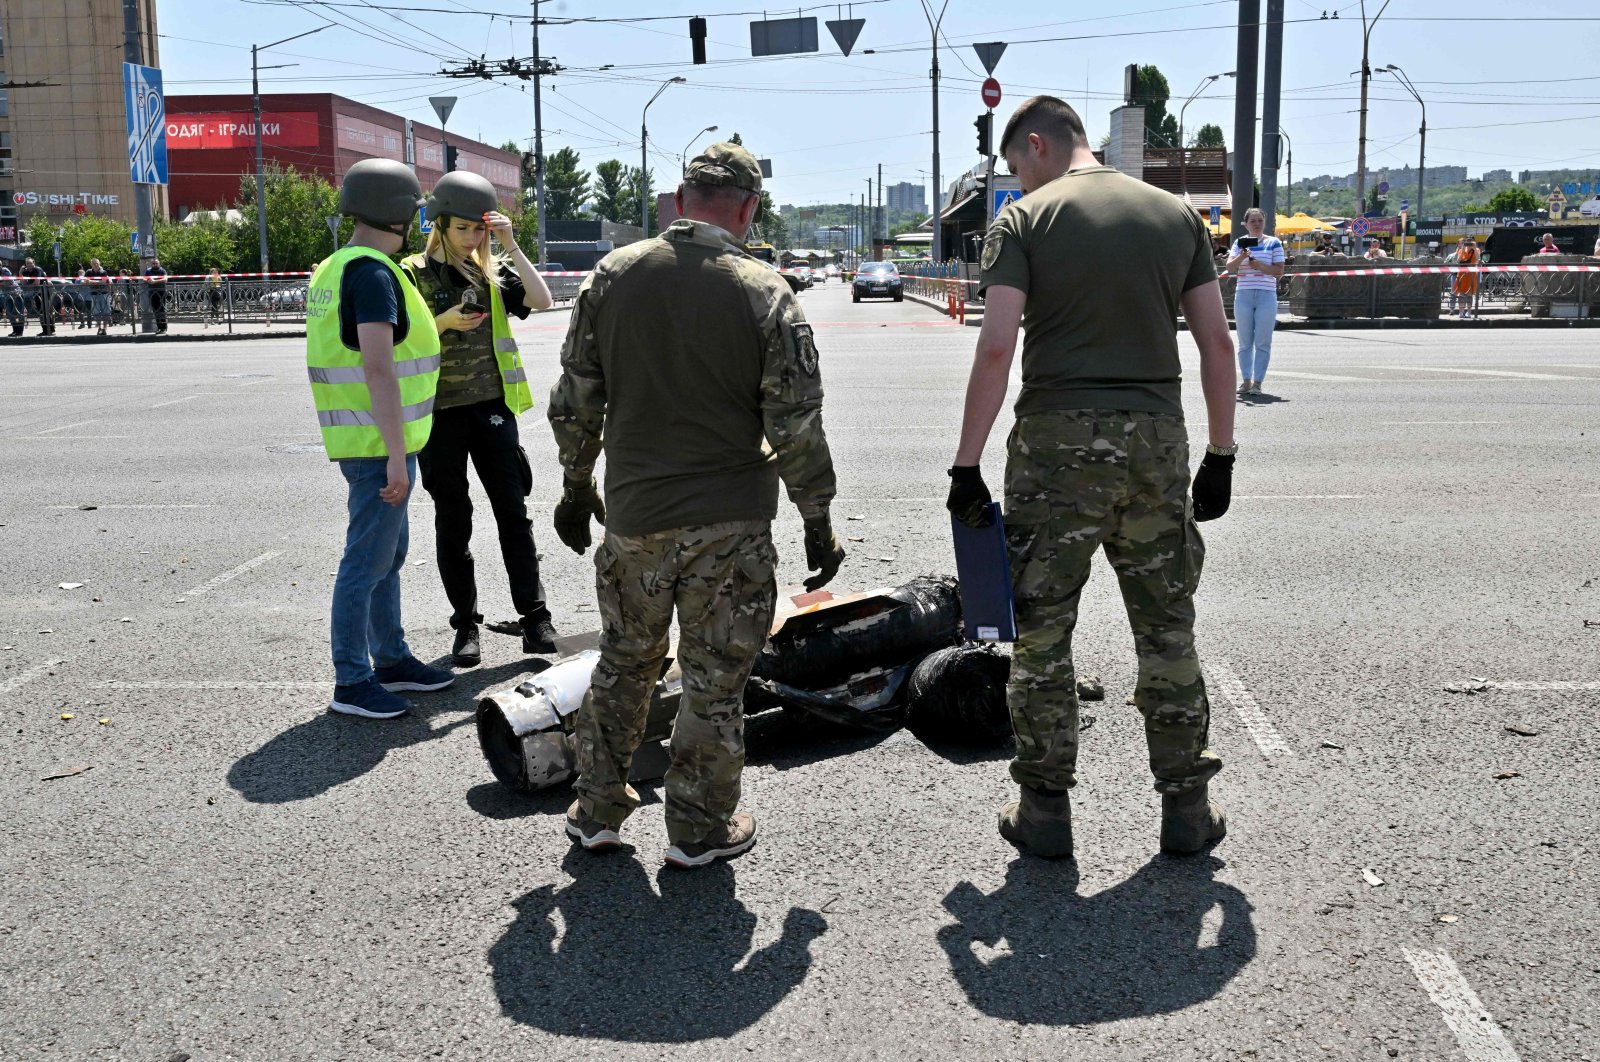 Police experts examine fragments of a missile after Russia fired a barrage of missiles for the second time in 24 hours, in an unusual daytime attack targetting the Ukrainian capital following overnight strikes, in Kyiv, Ukraine, May 29, 2023. (AFP Photo)